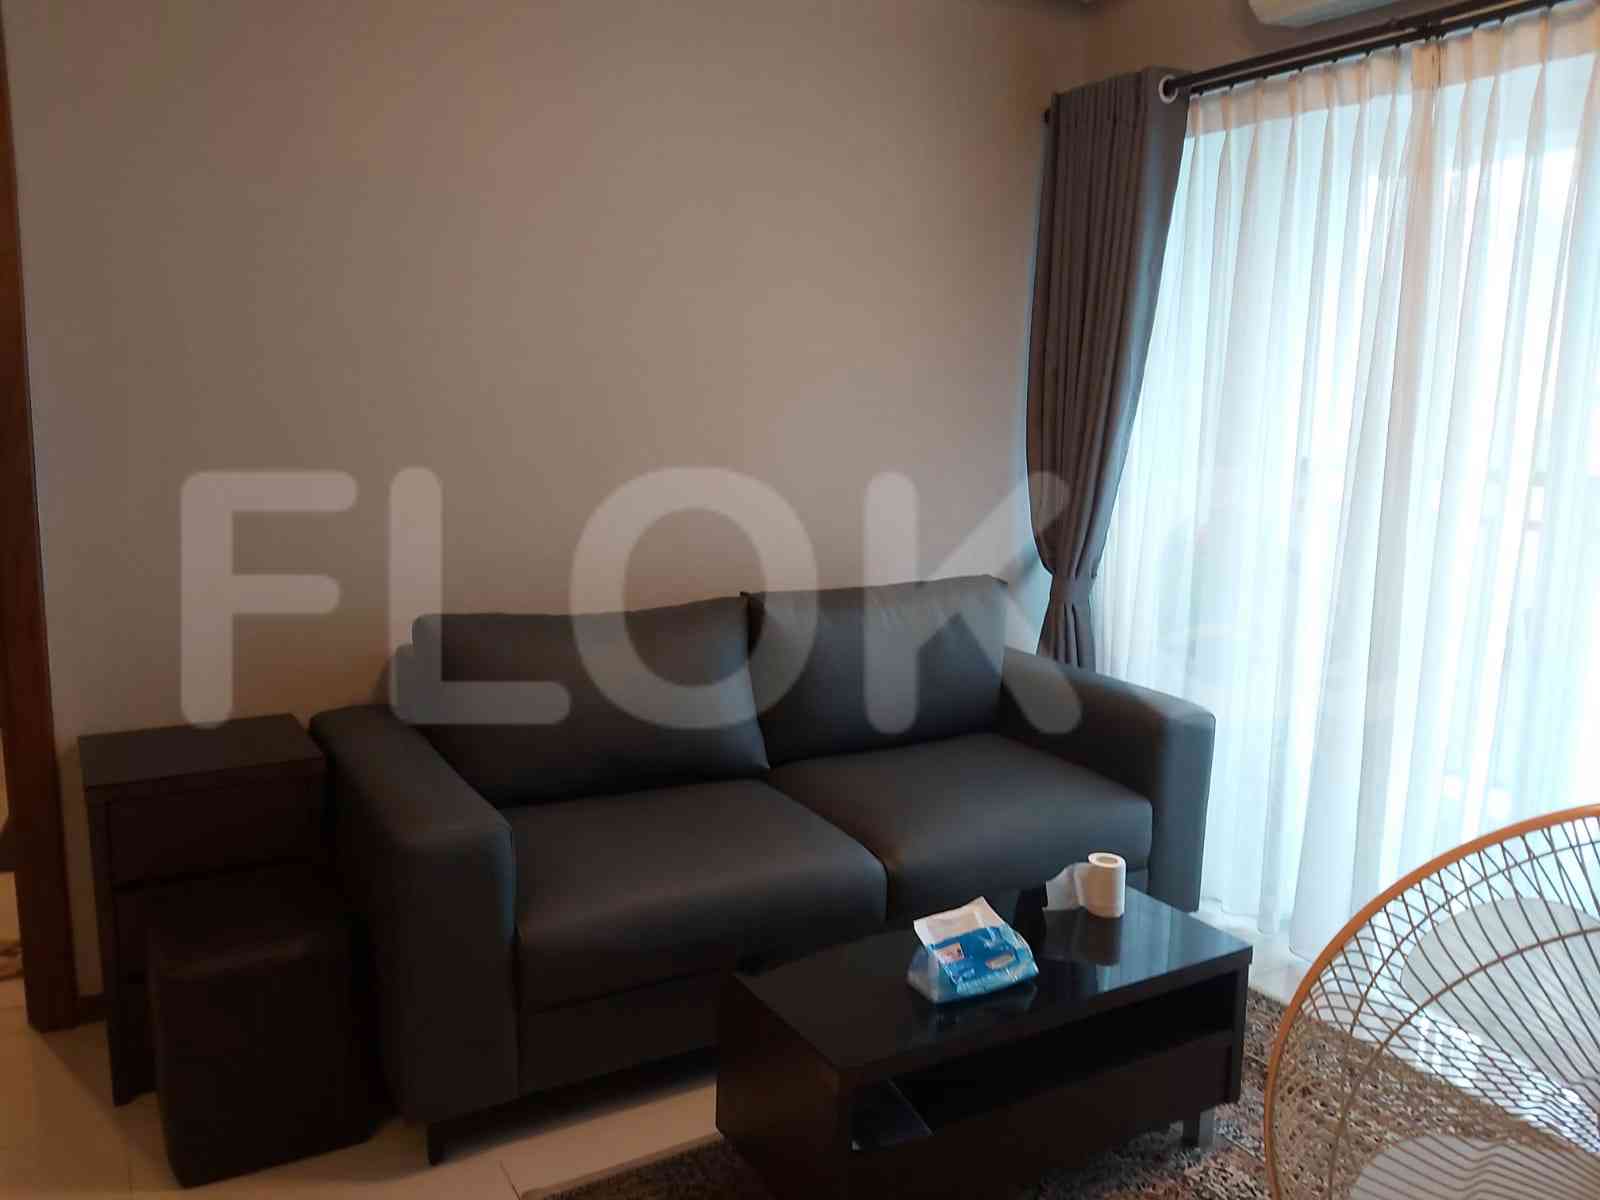 2 Bedroom on 22nd Floor for Rent in Thamrin Executive Residence - fth9e9 1